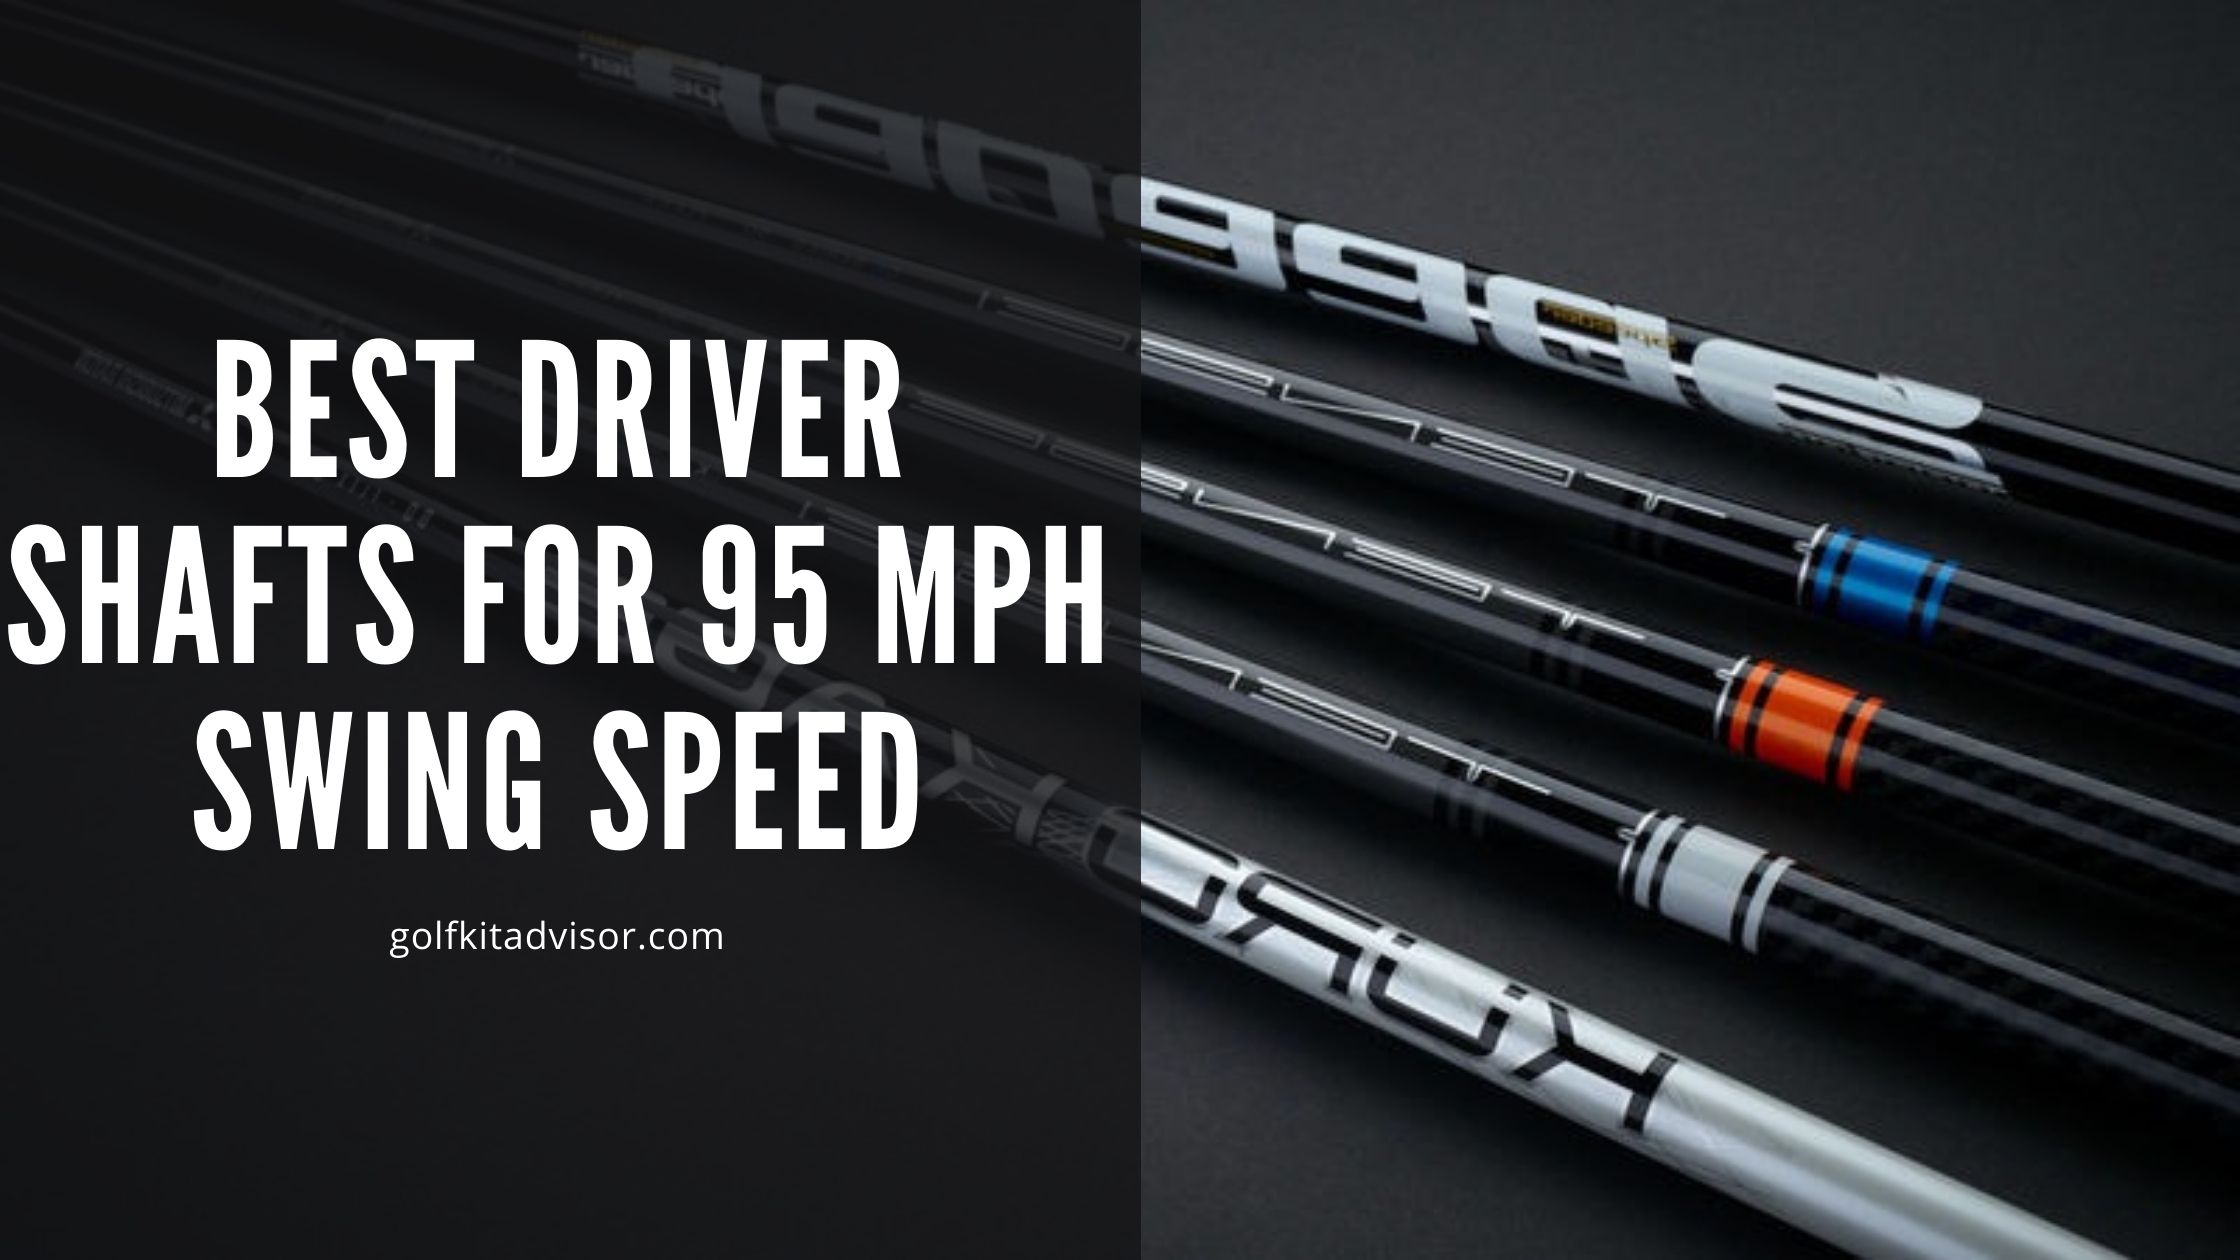 Best Driver Shafts for 95 Mph Swing Speed